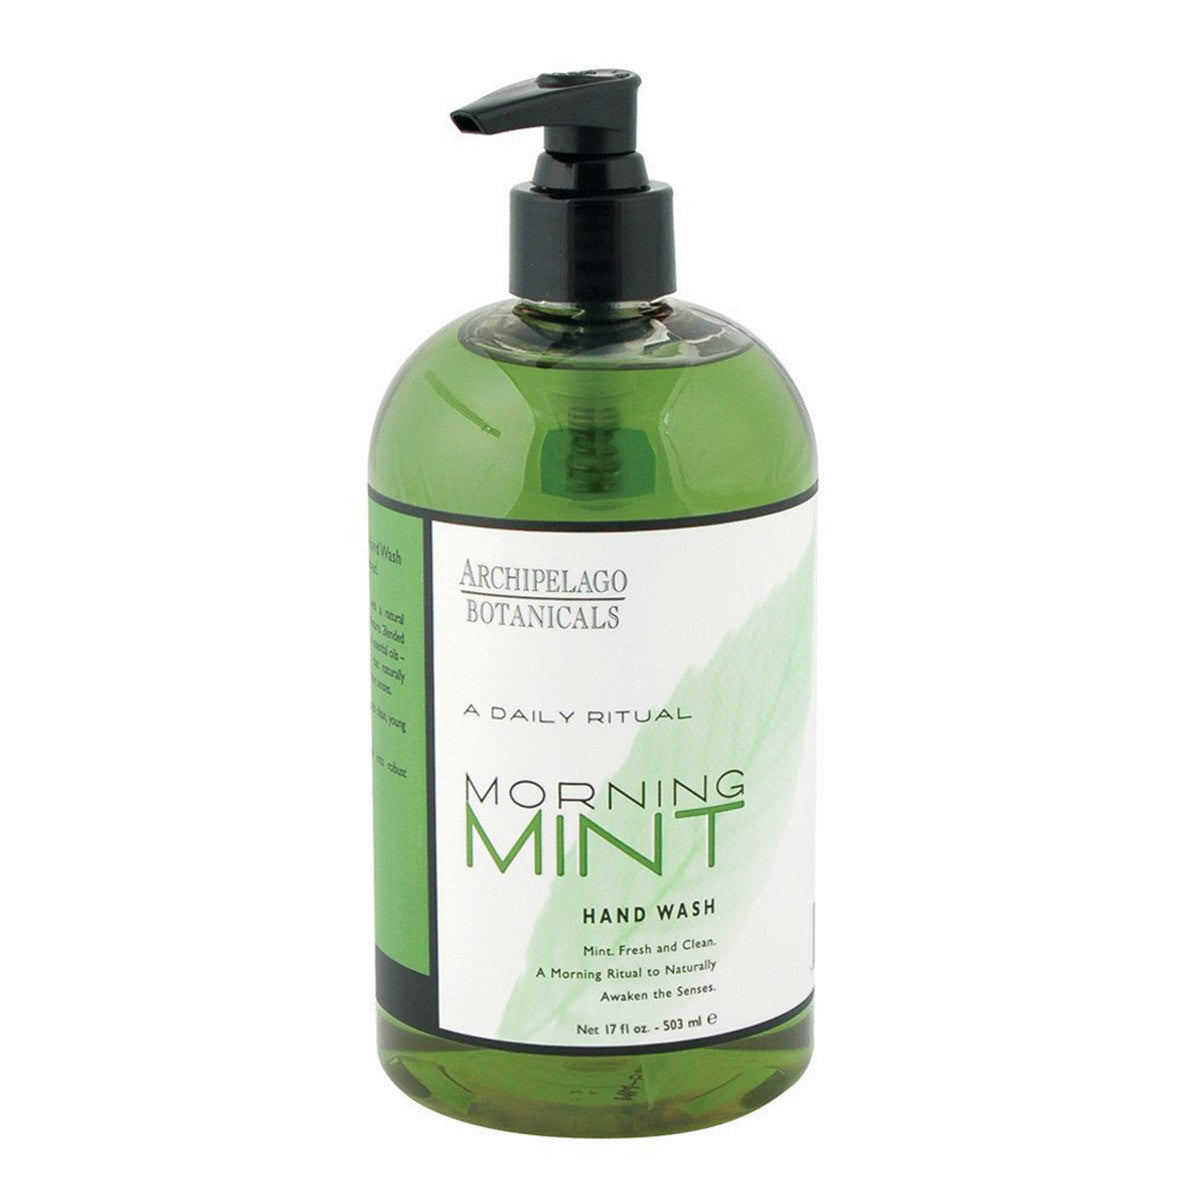 Primary image of Morning Mint Hand Wash